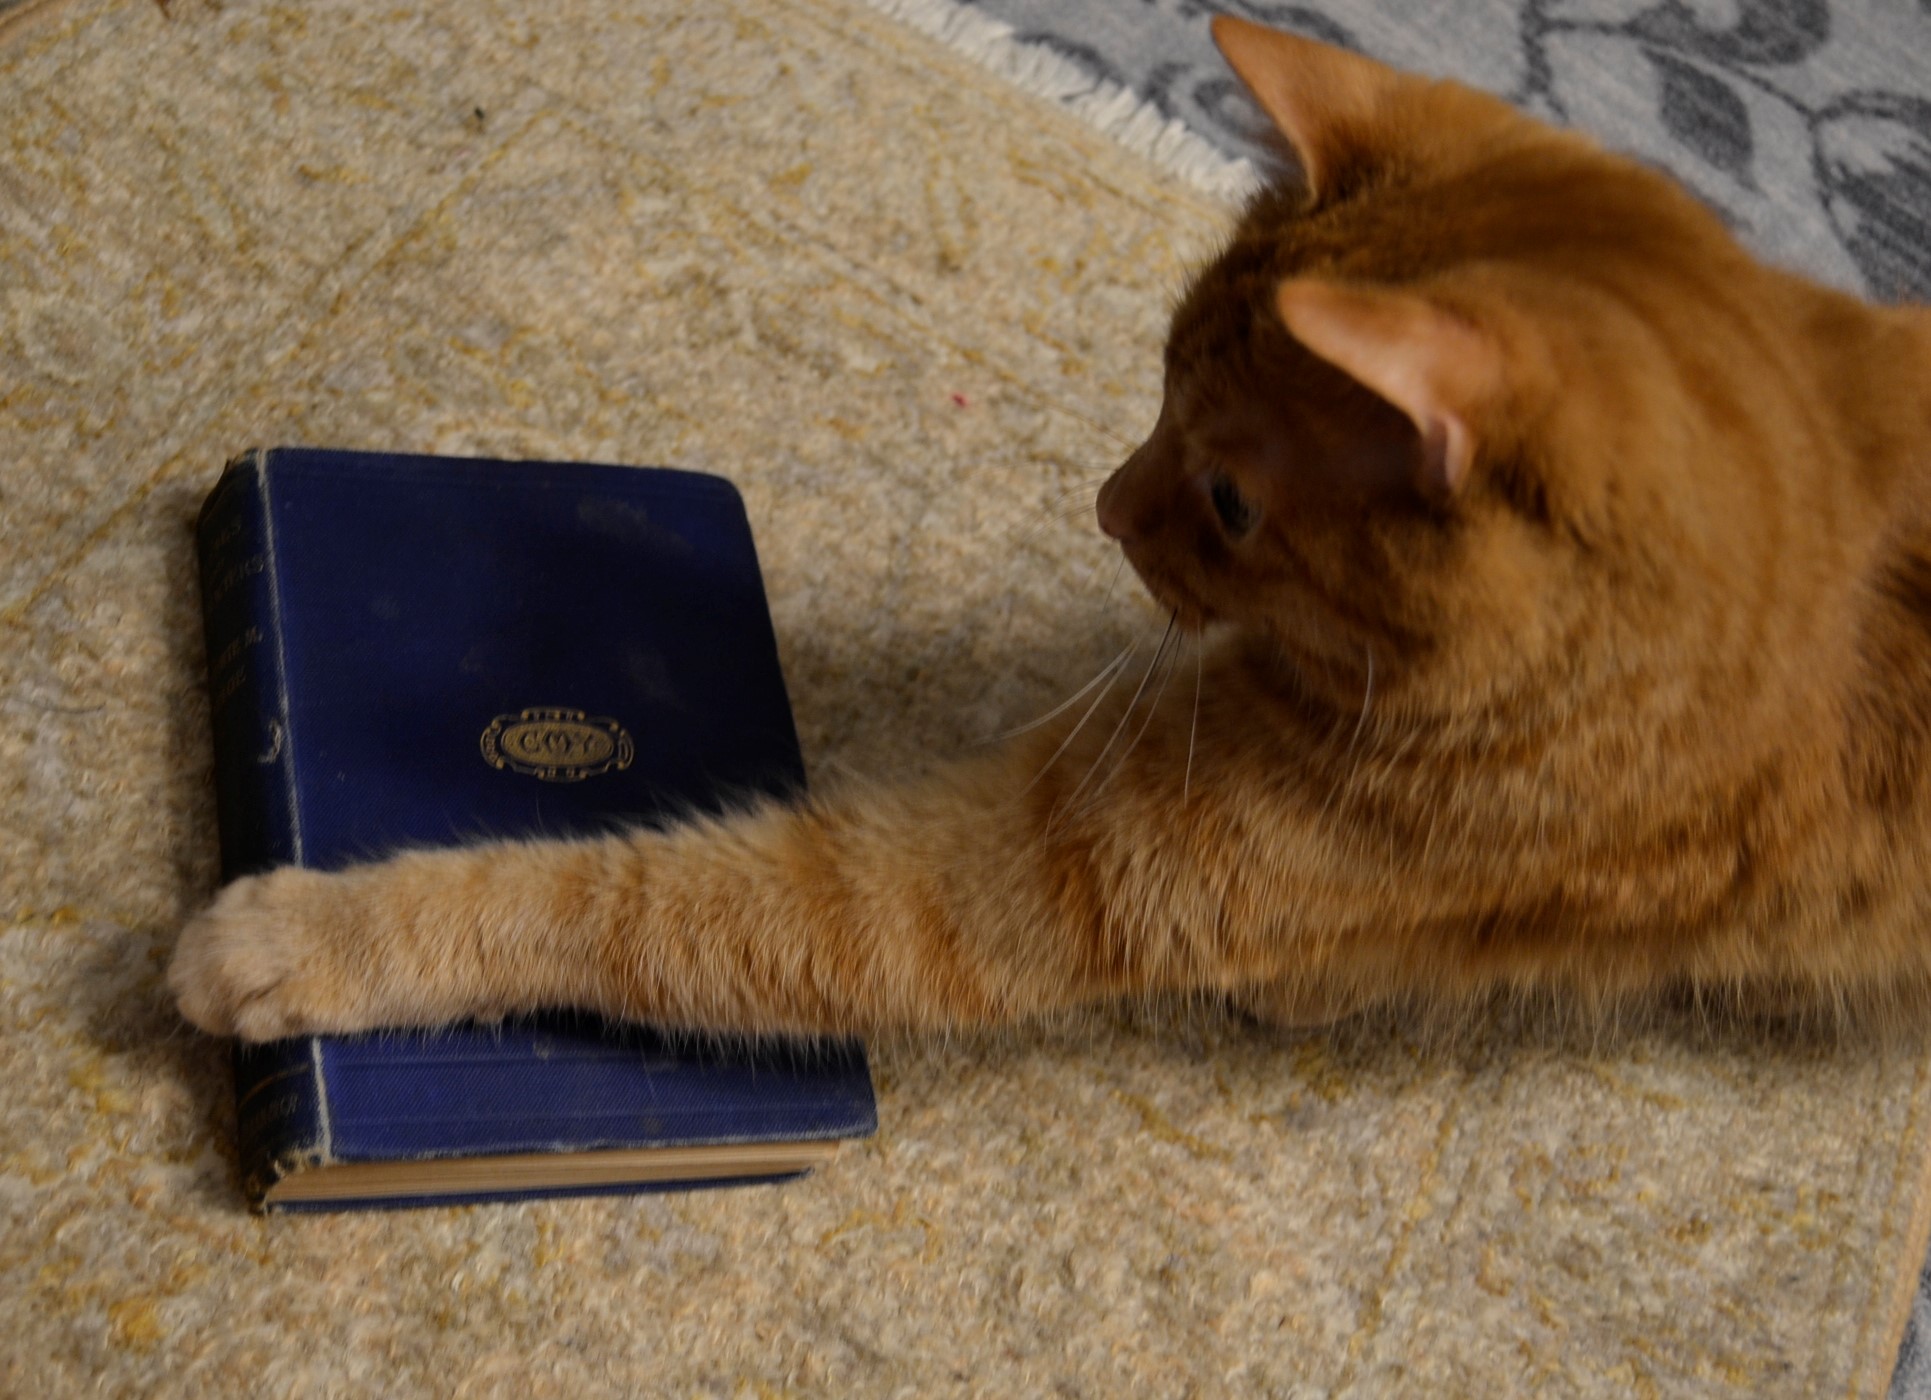 An orange tabby rests its paw across the cover of an old book.